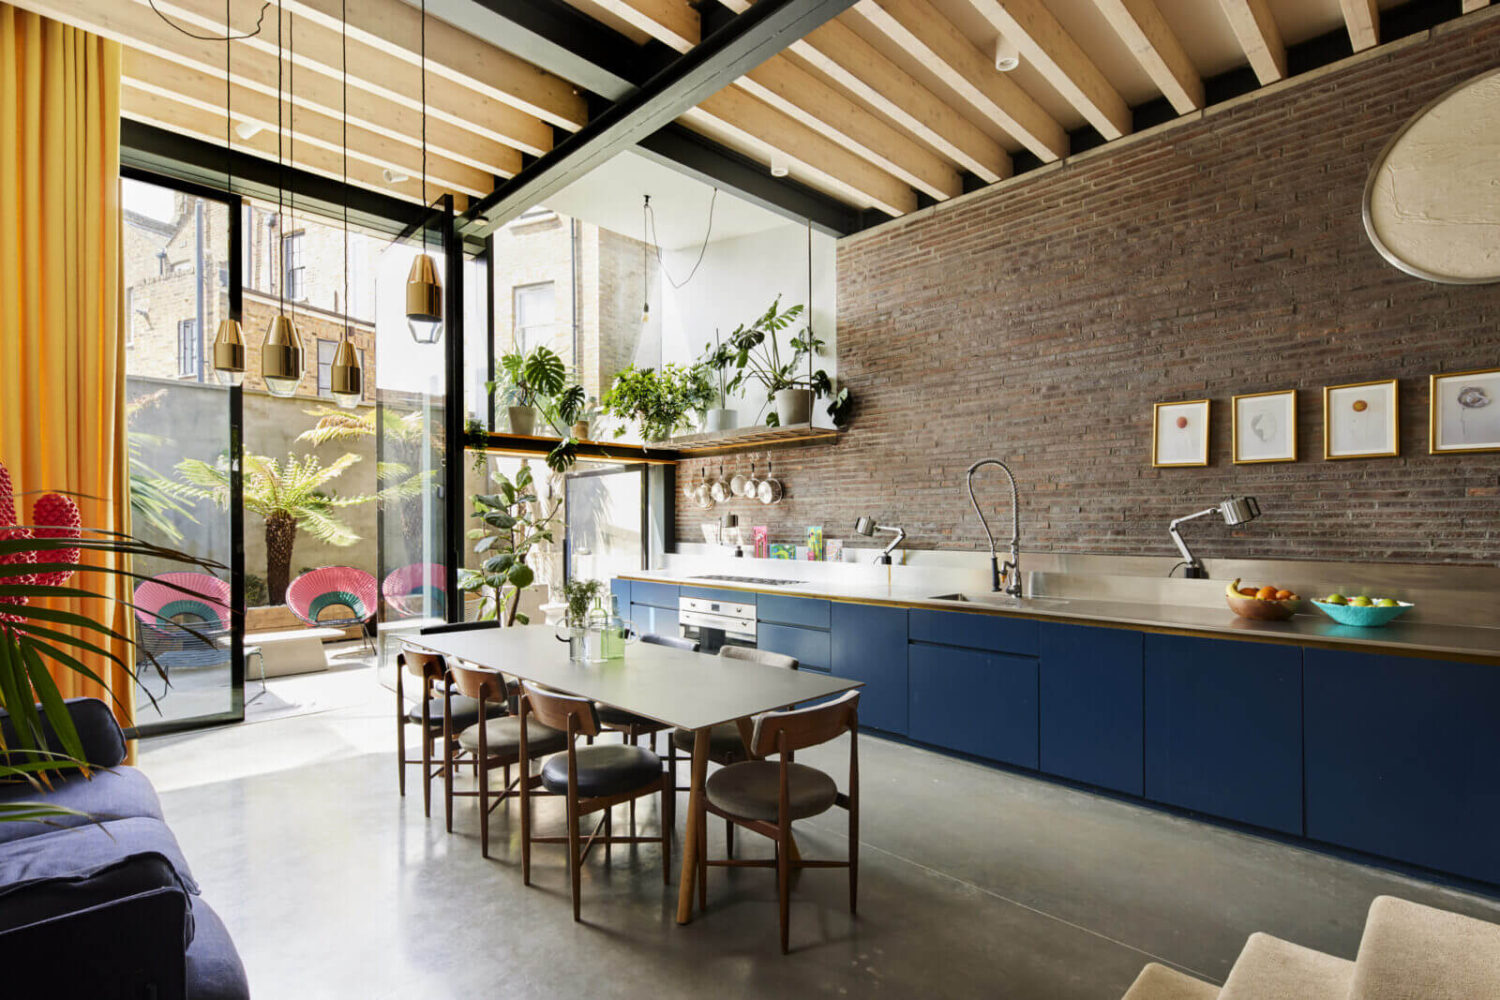 kitchen-blue-cabinets-brick-wall-dining-table-high-ceilings-nordroom